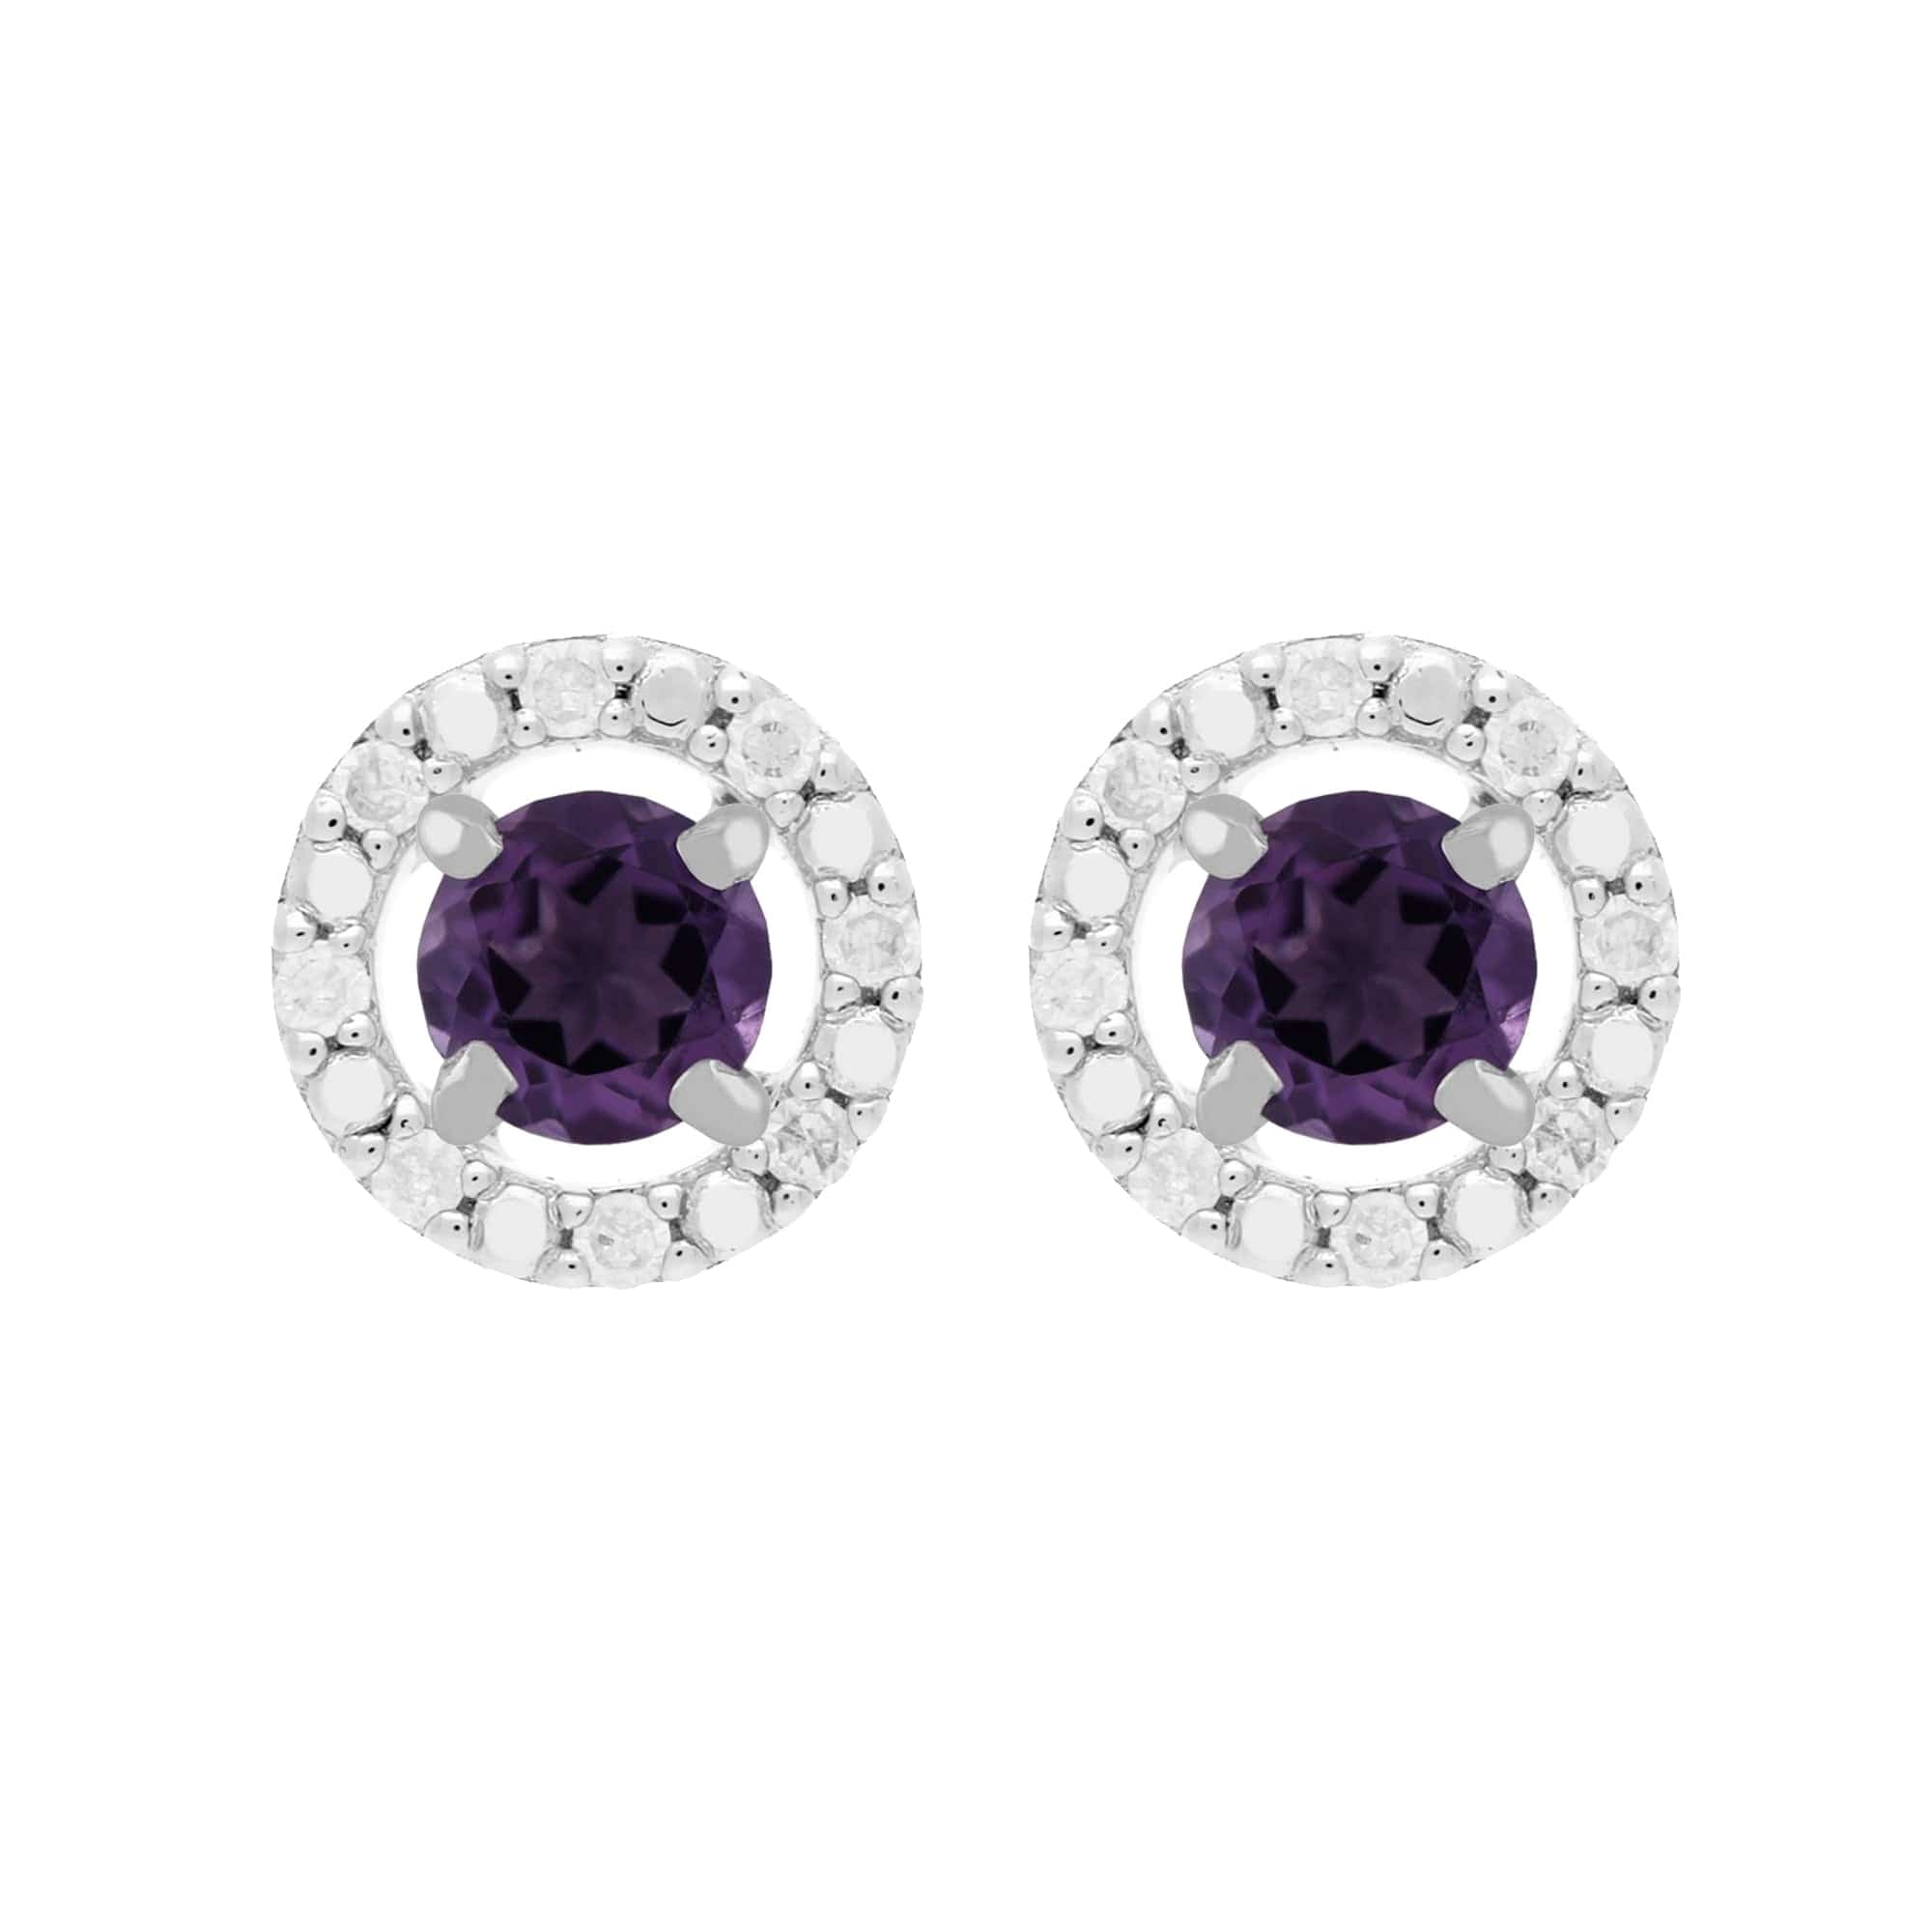 Classic Round Amethyst Stud Earrings with Detachable Diamond Round Ear Jacket in 9ct White Gold - Gemondo